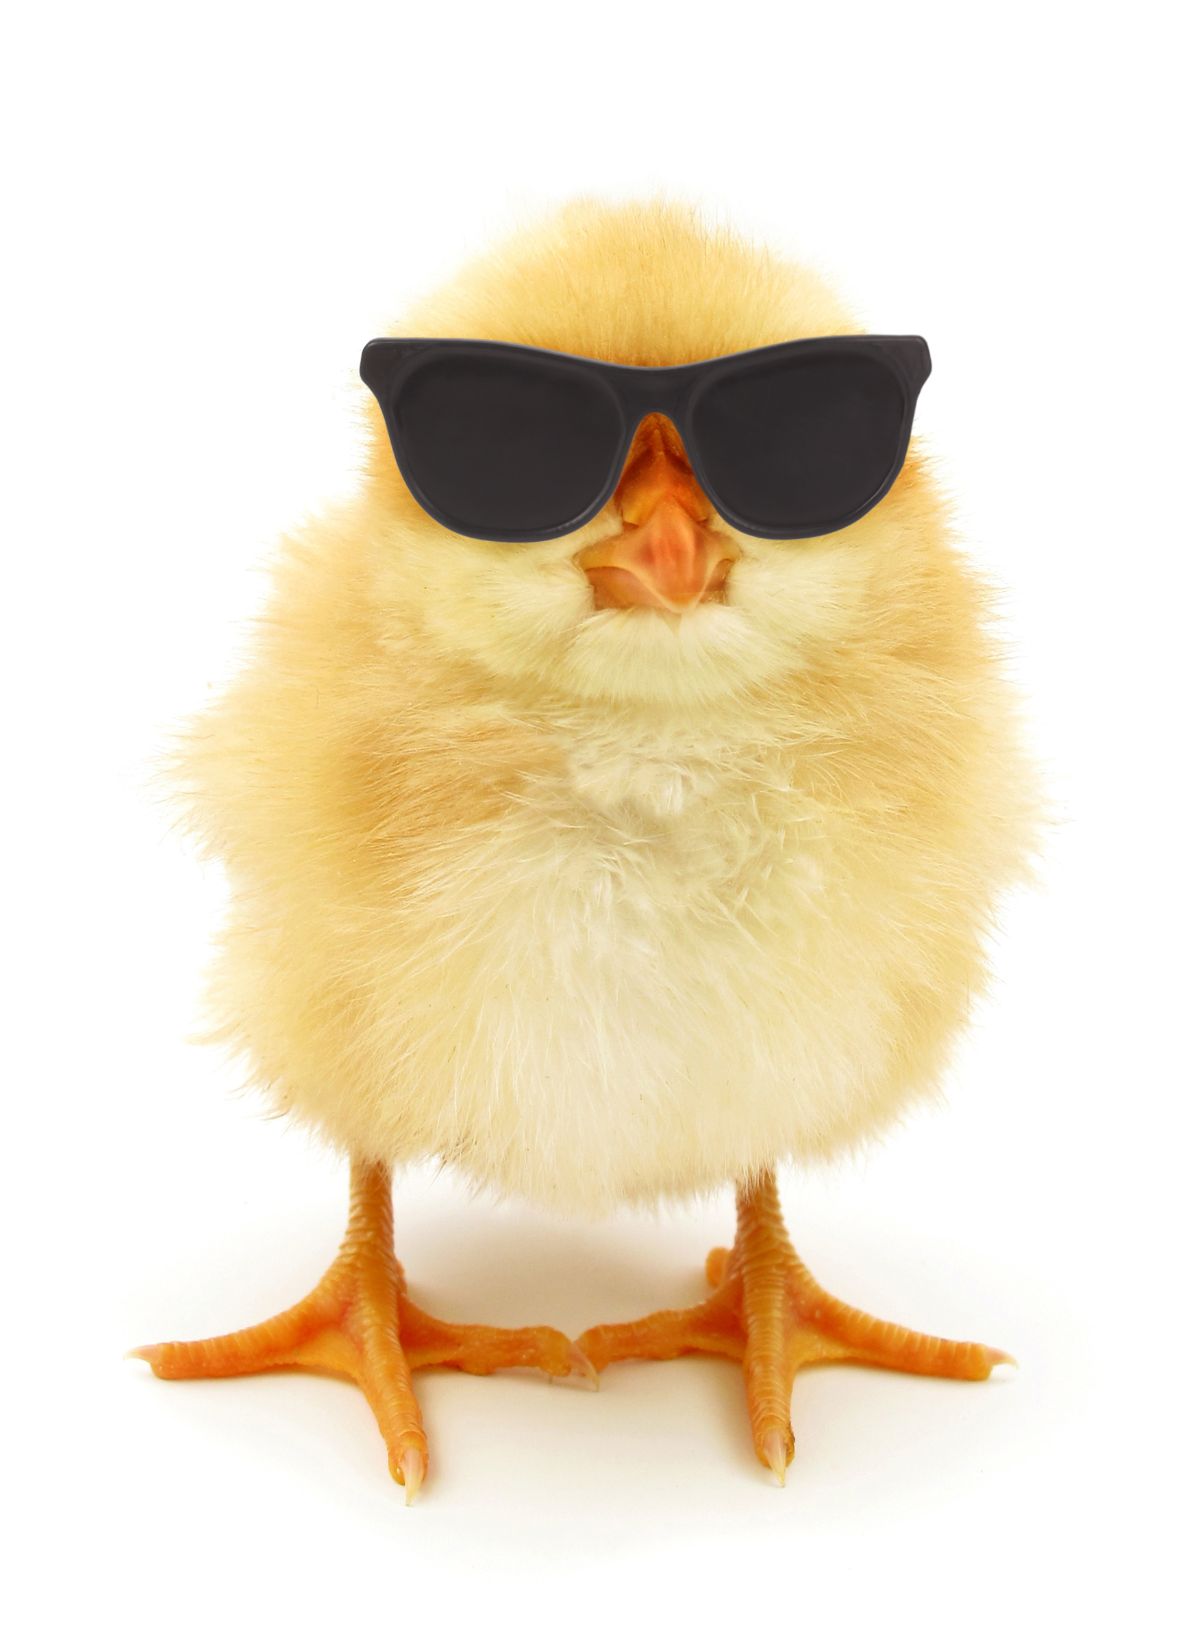 Chick with sunglasses.